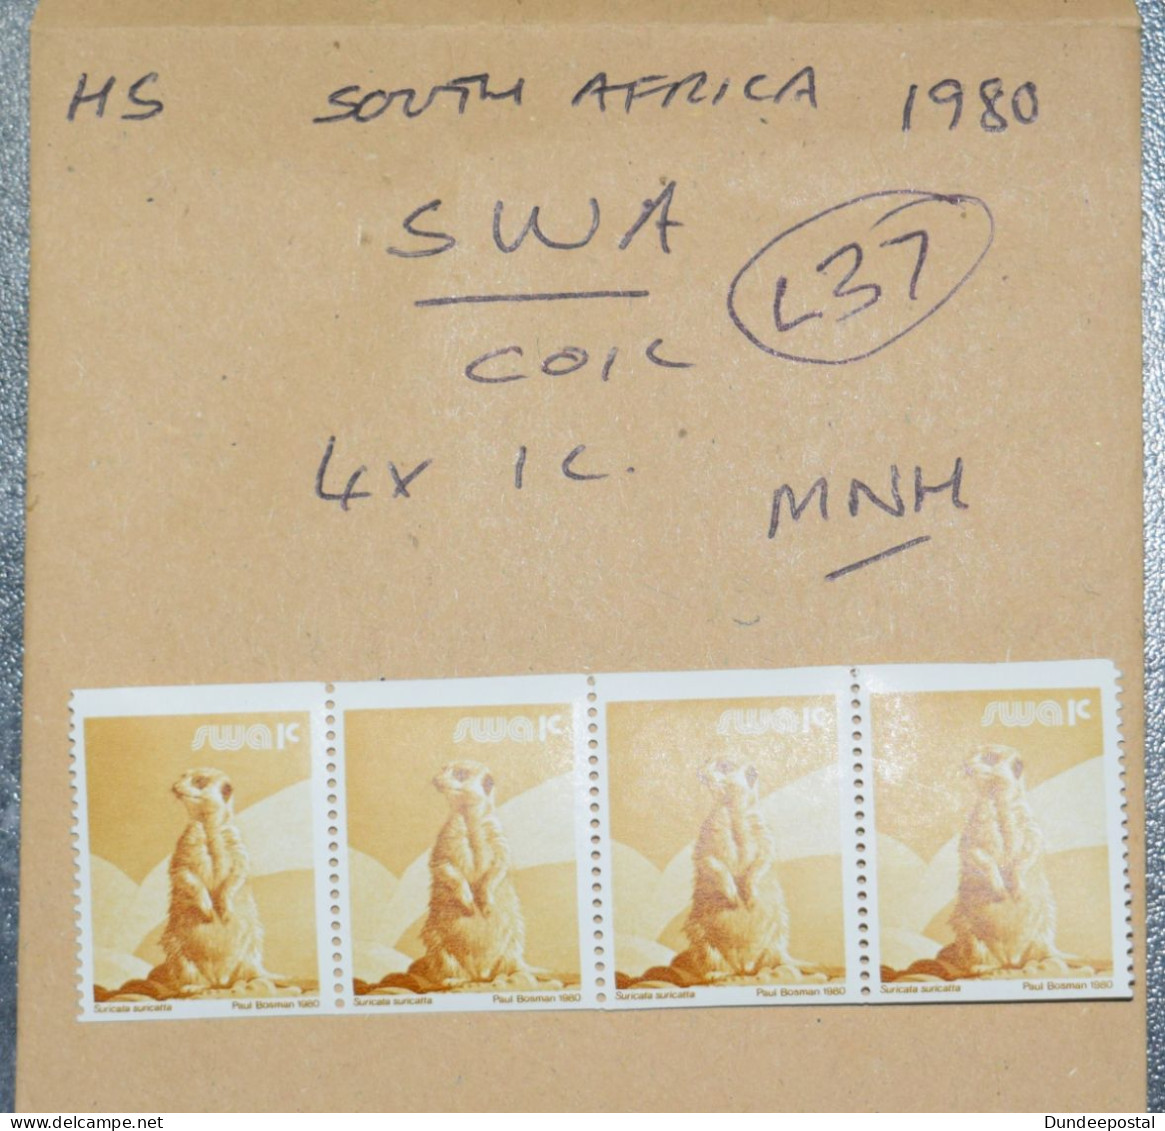 SOUTH AFRICA  STAMPS SWA Coil X 4 MNH  1980  L37  ~~L@@K~~ - Ungebraucht